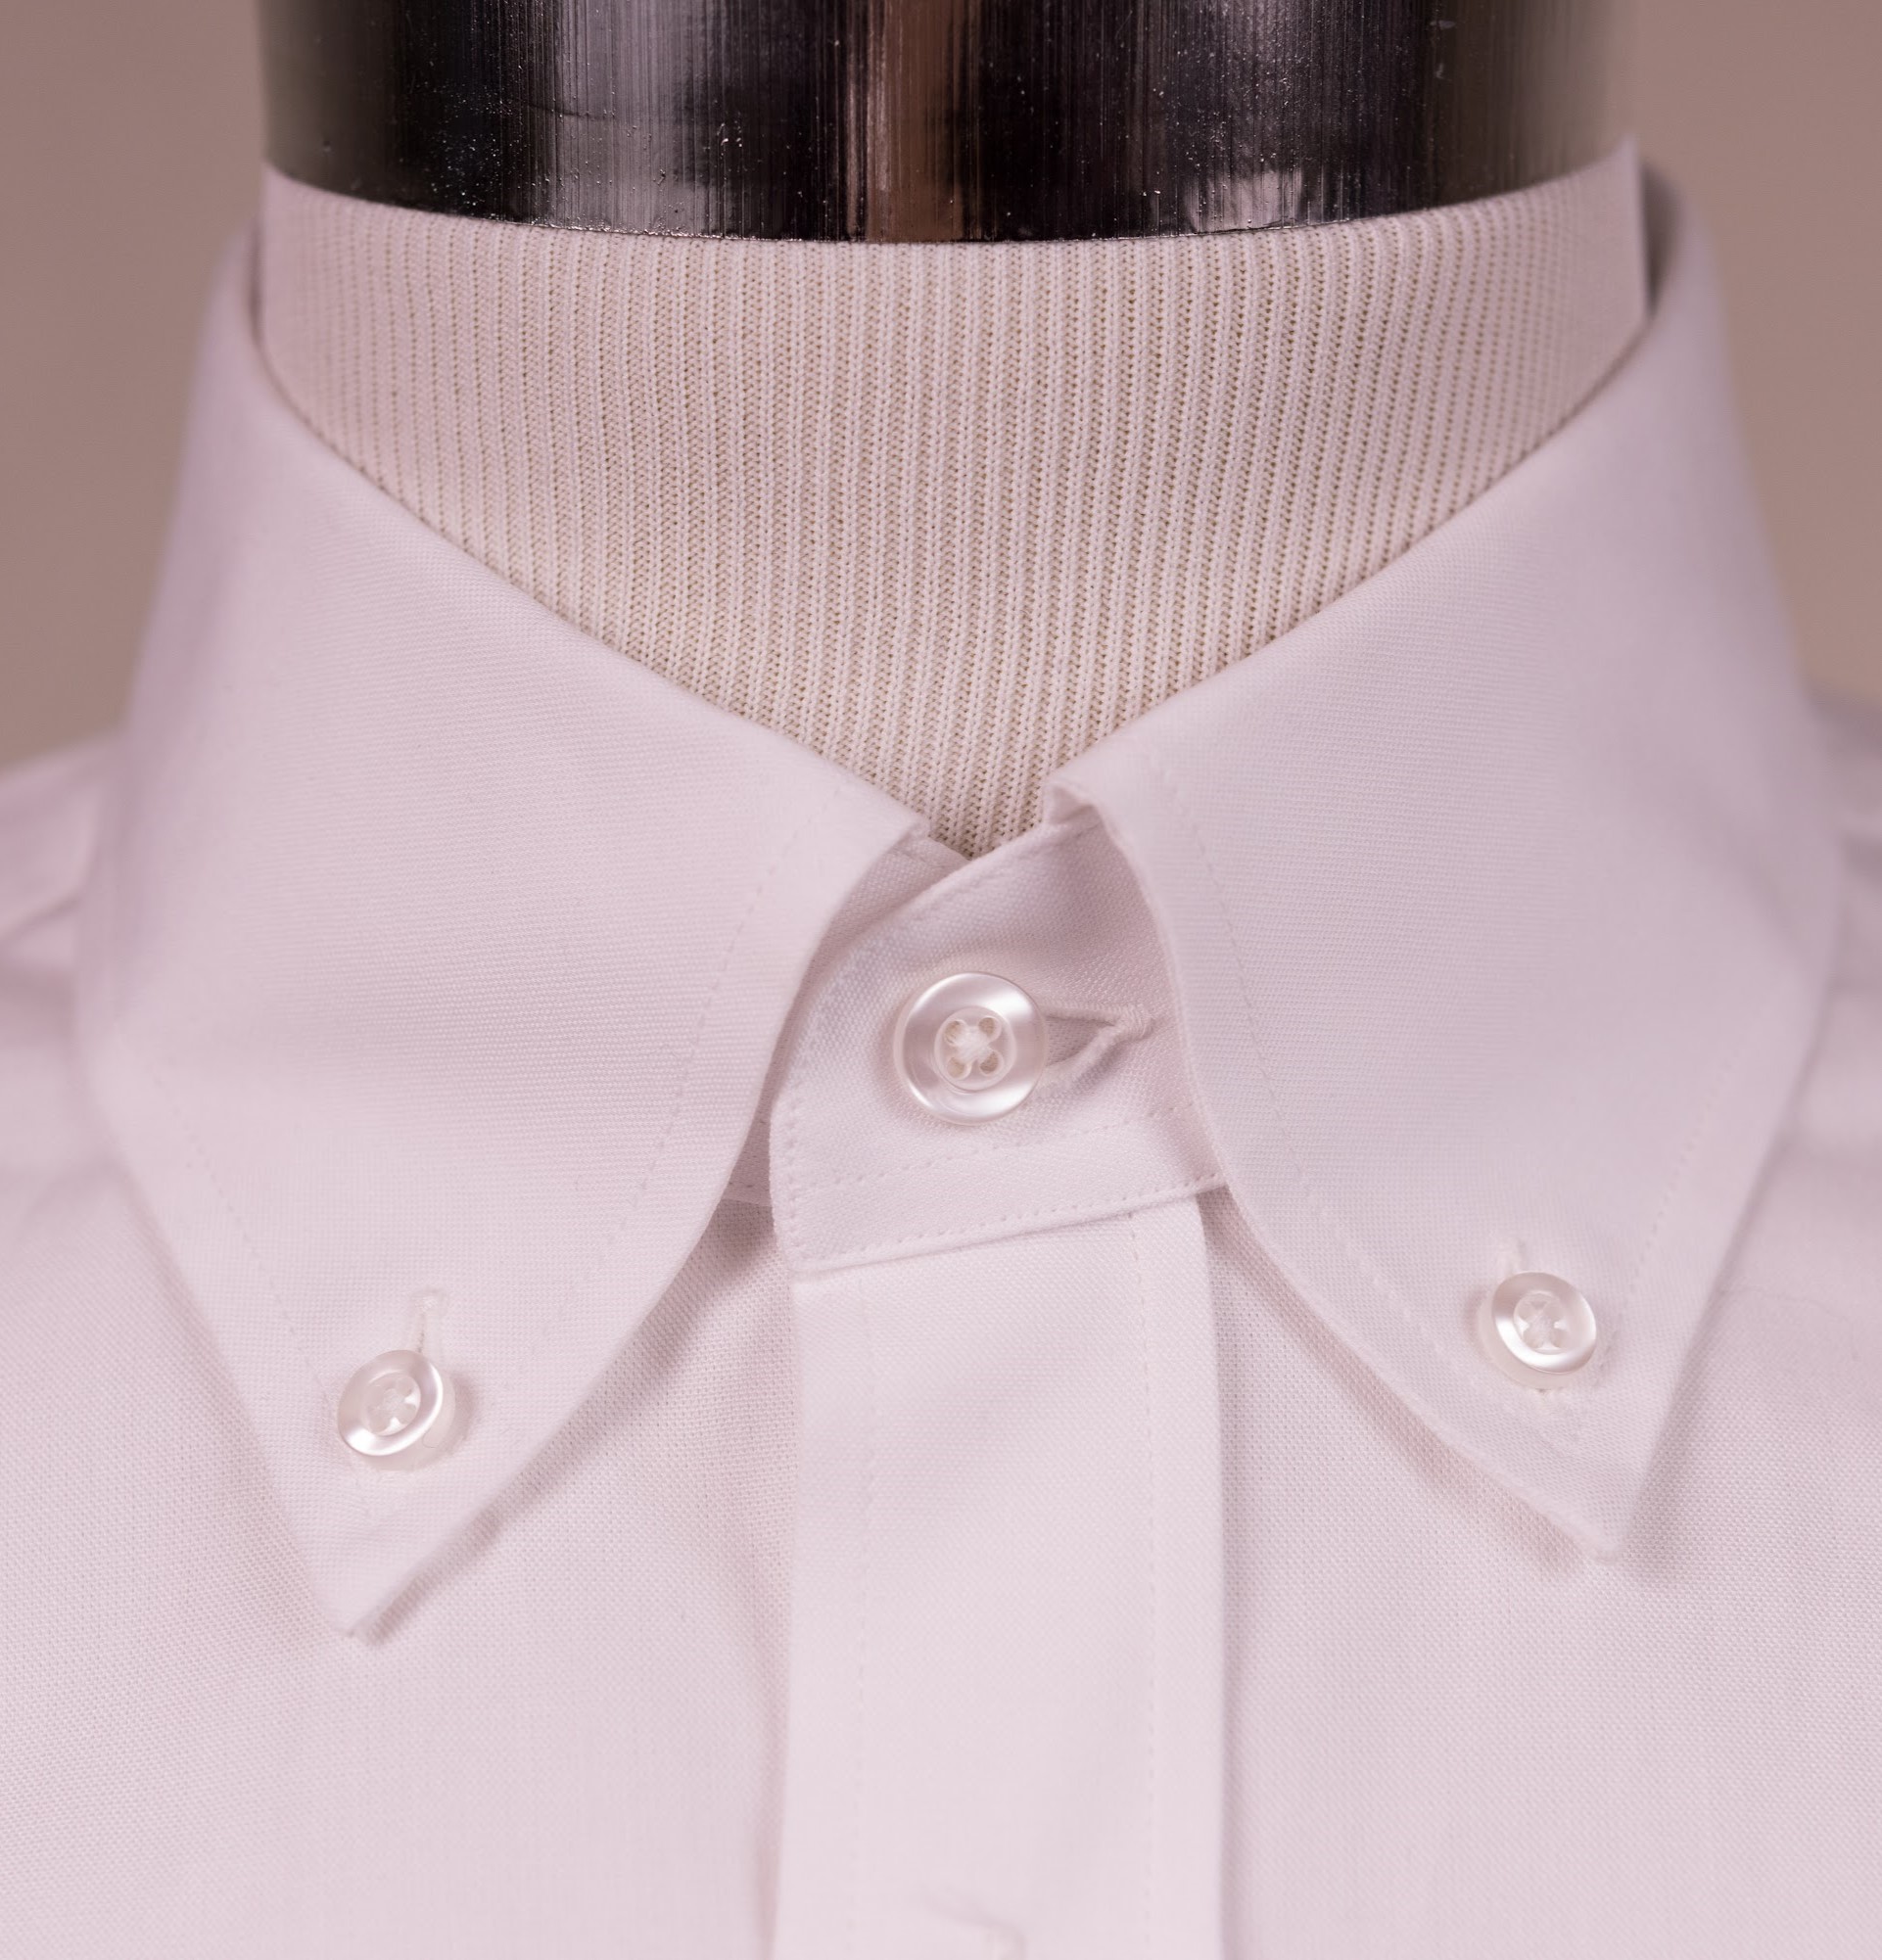 Button Down shirt collars typically do not look good with Half Windsor Knots